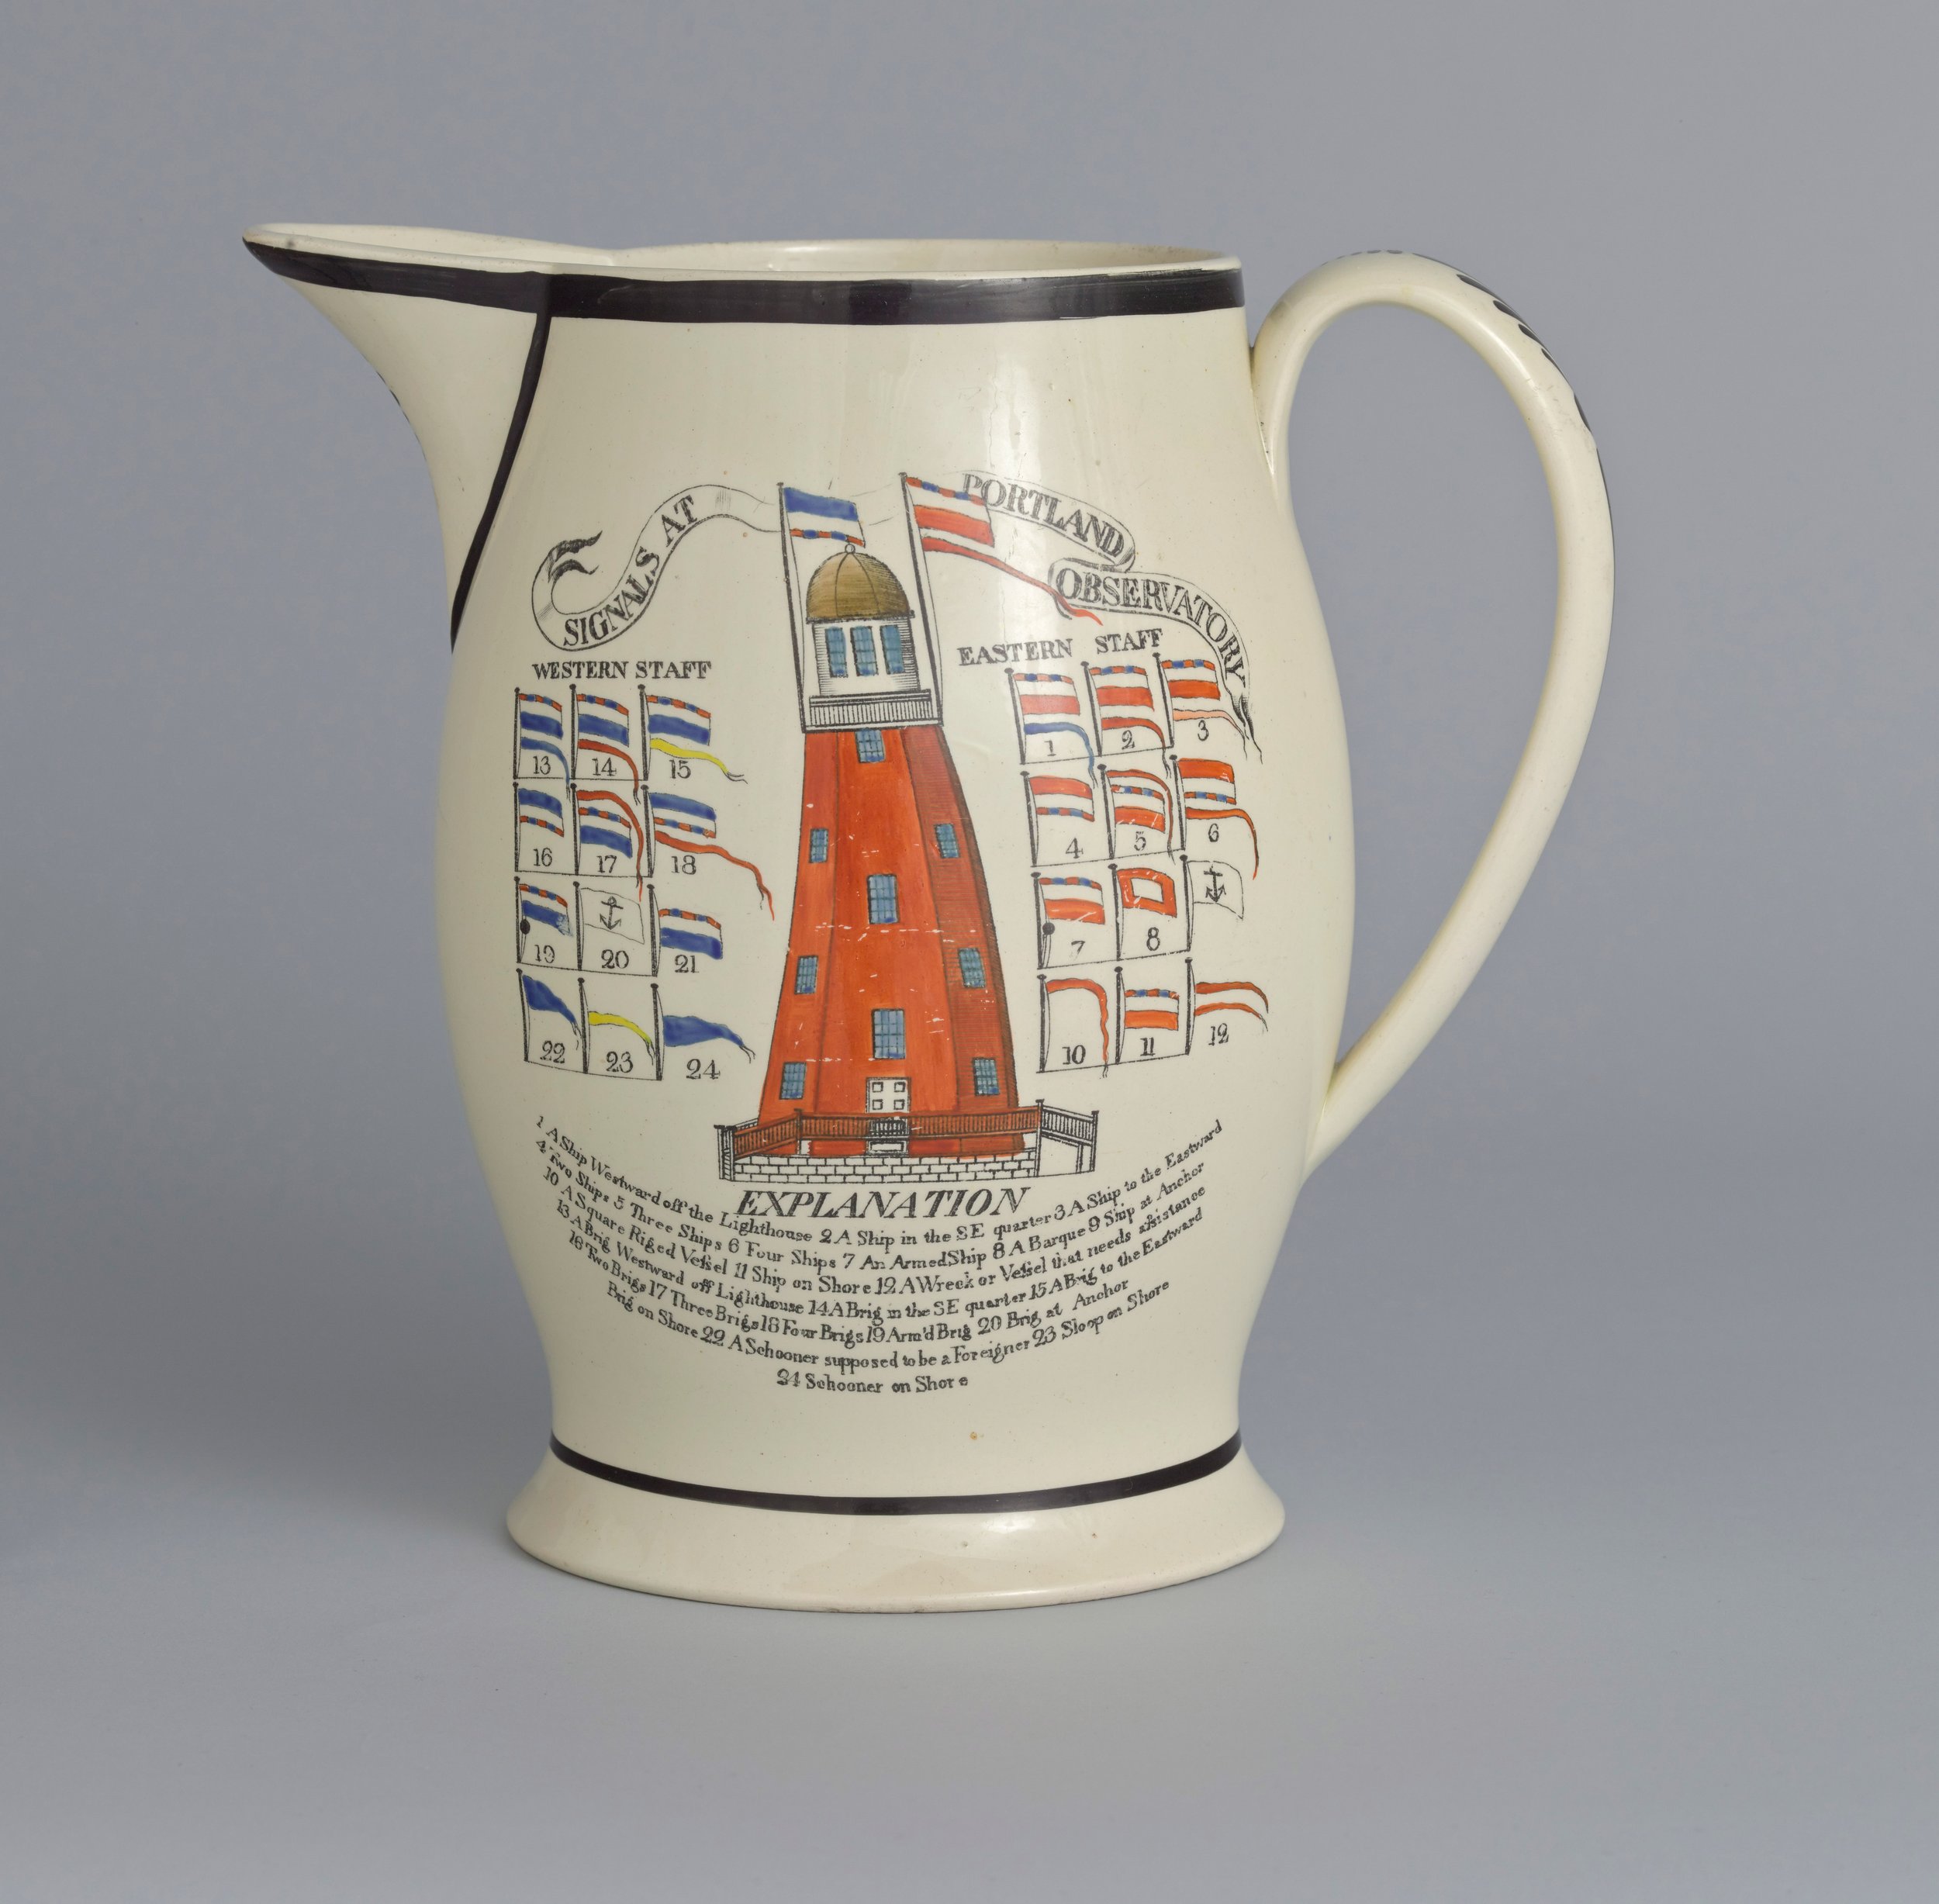   Liverpool Type Porcelain  England, circa 1790–1840  Pitcher: Signals at Portland Observatory , post 1807 creamware with transfer-printed decoration, 9 x 8 1/2 inches Gift of Mrs. James McKinley Rose in memory of her father, William B. Goodwin, 1976